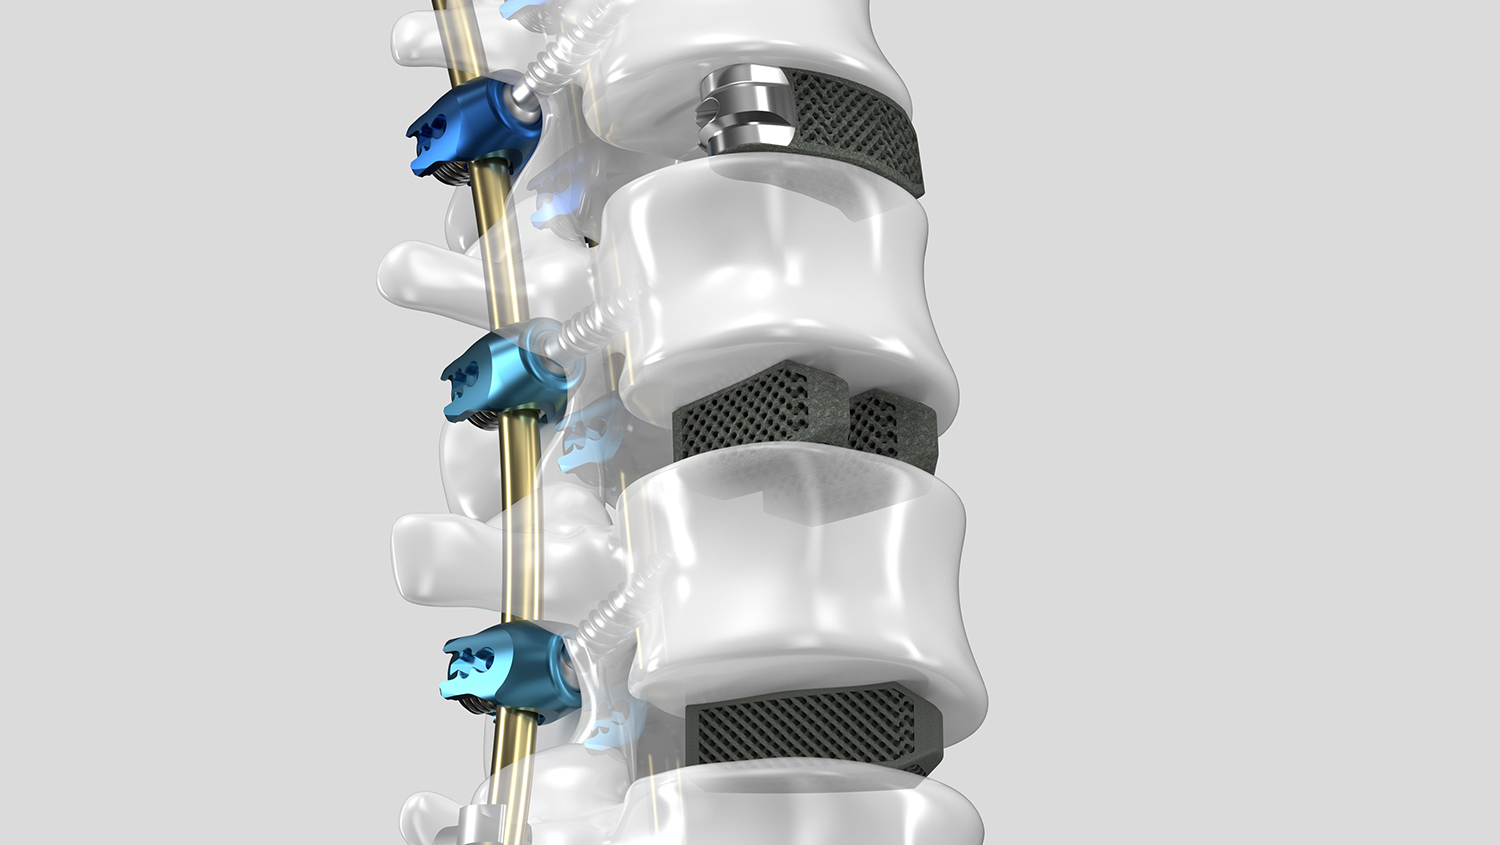 Spine model with 3D printed Interbody Fusion devices